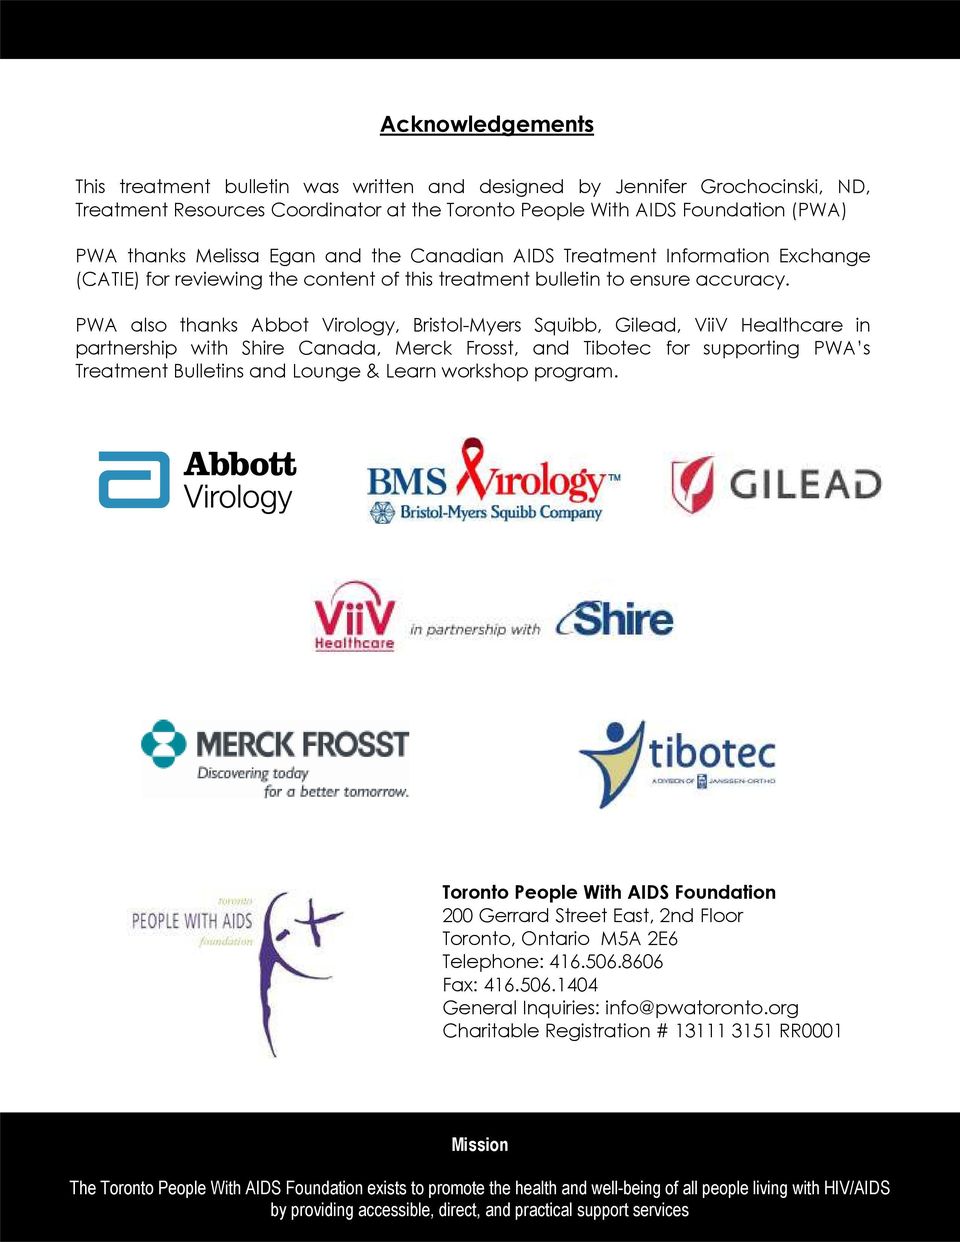 PWA also thanks Abbot Virology, Bristol-Myers Squibb, Gilead, ViiV Healthcare in partnership with Shire Canada, Merck Frosst, and Tibotec for supporting PWA s Treatment Bulletins and Lounge & Learn